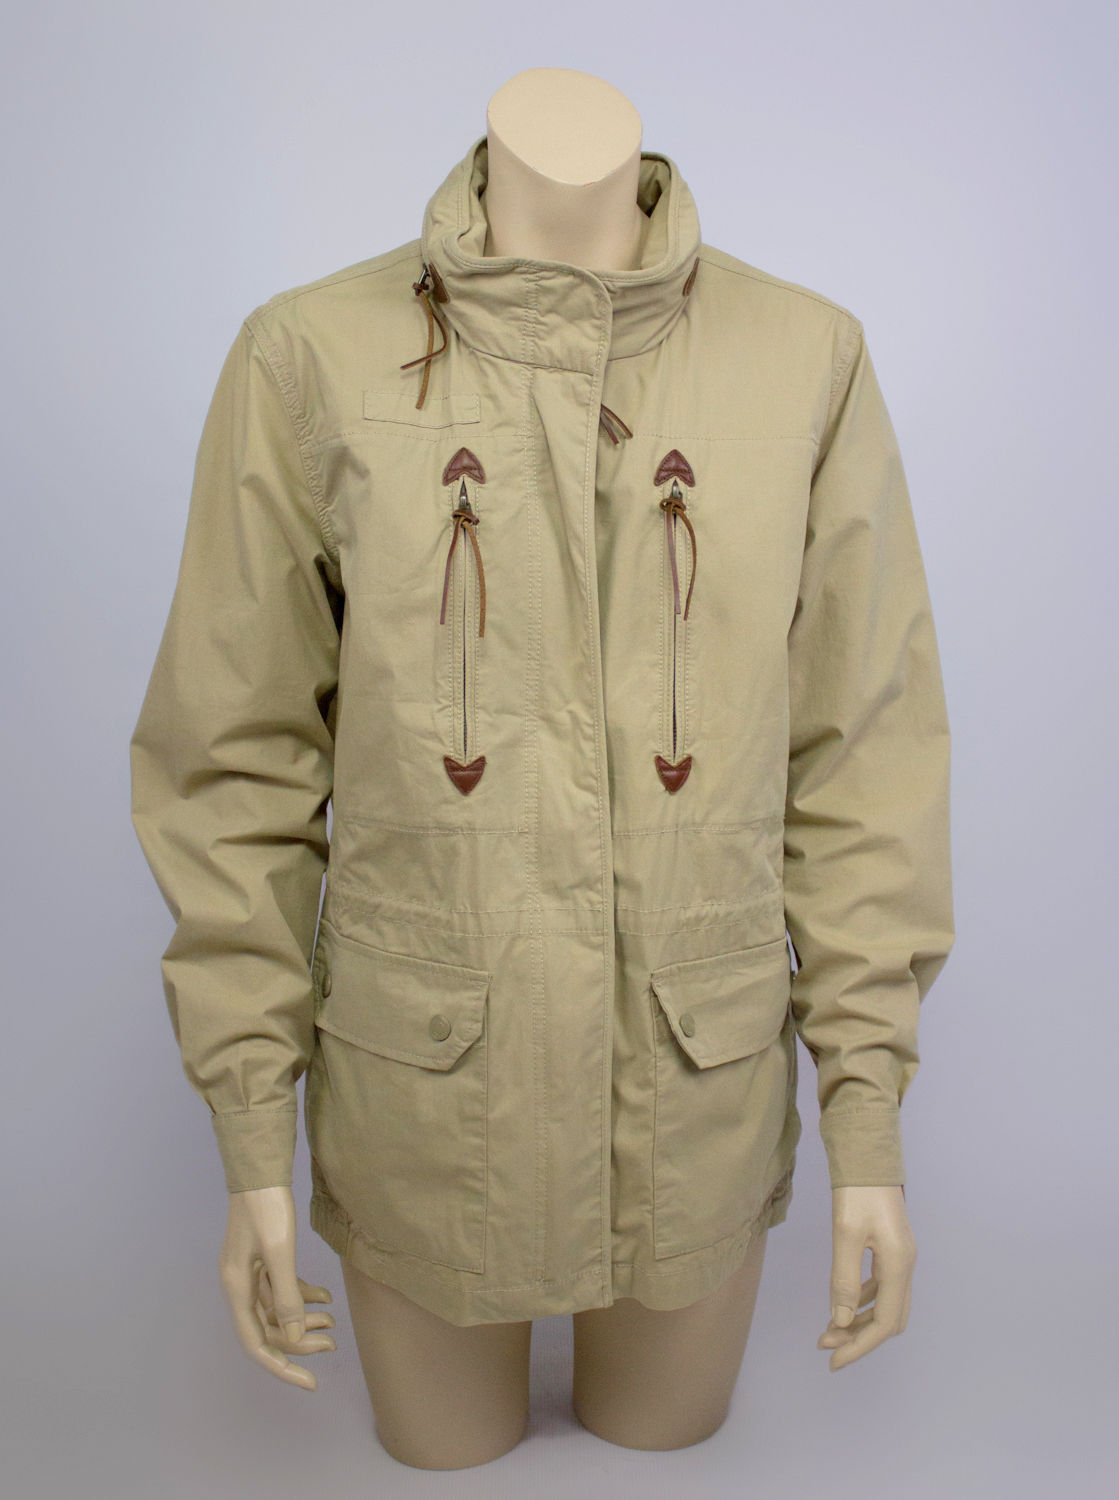 AIGLE Safari Jacket with Leather details, SIZE US 12 - secondfirst